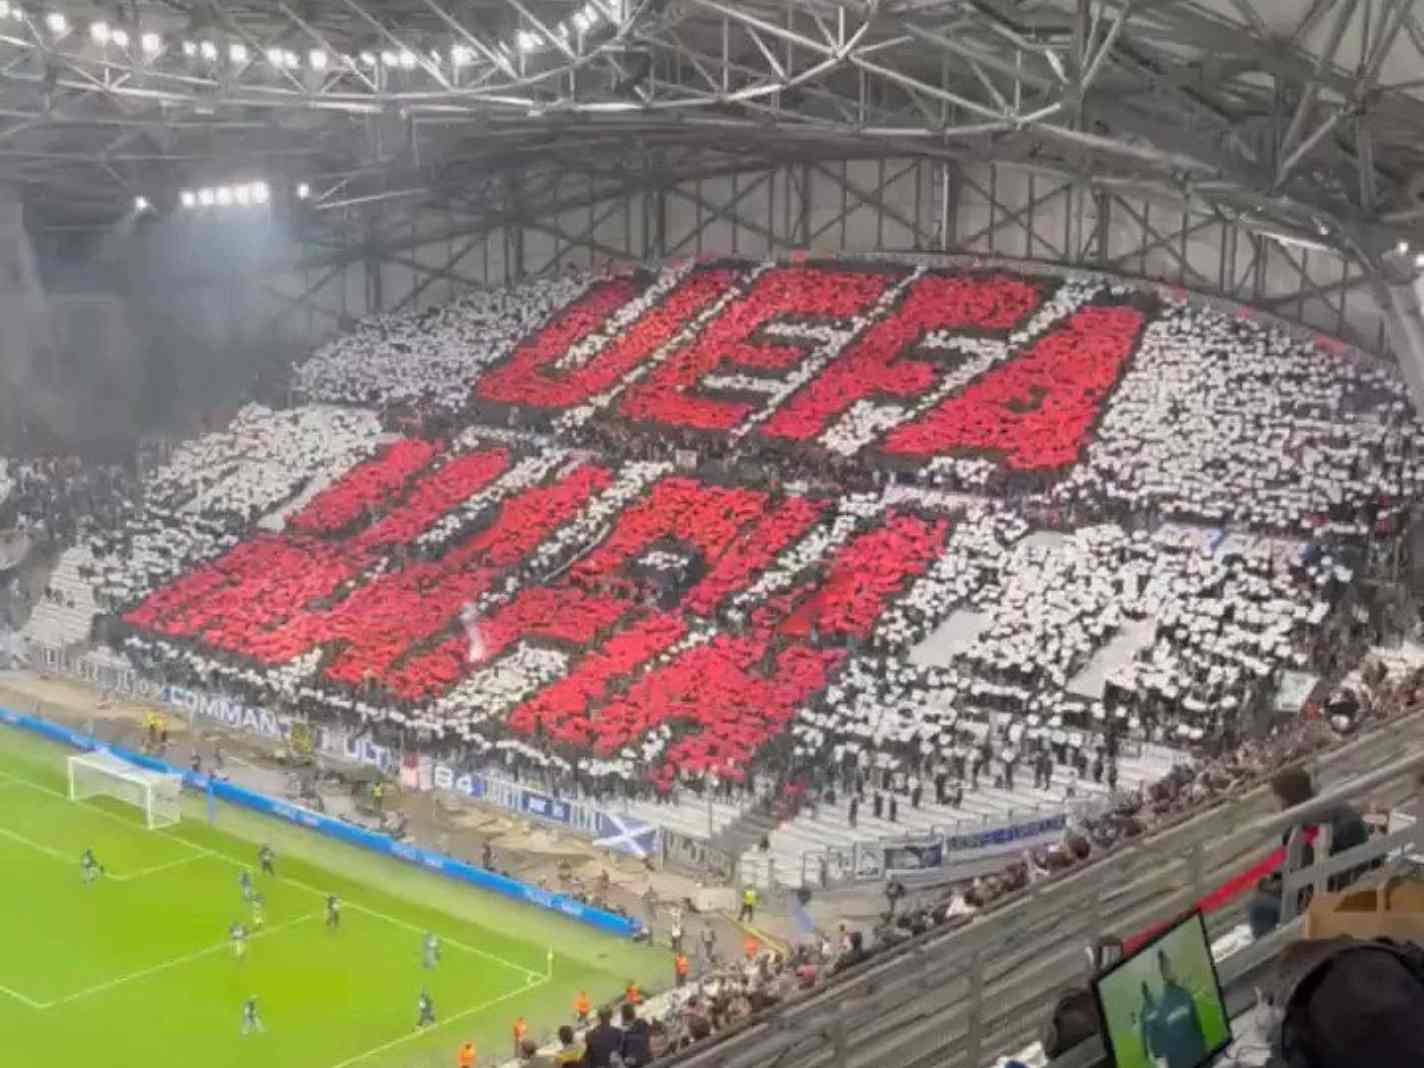 The photo shows Marseille fans displaying a UEFA MAFIA tifo during their Conference League clash against Feyenoord